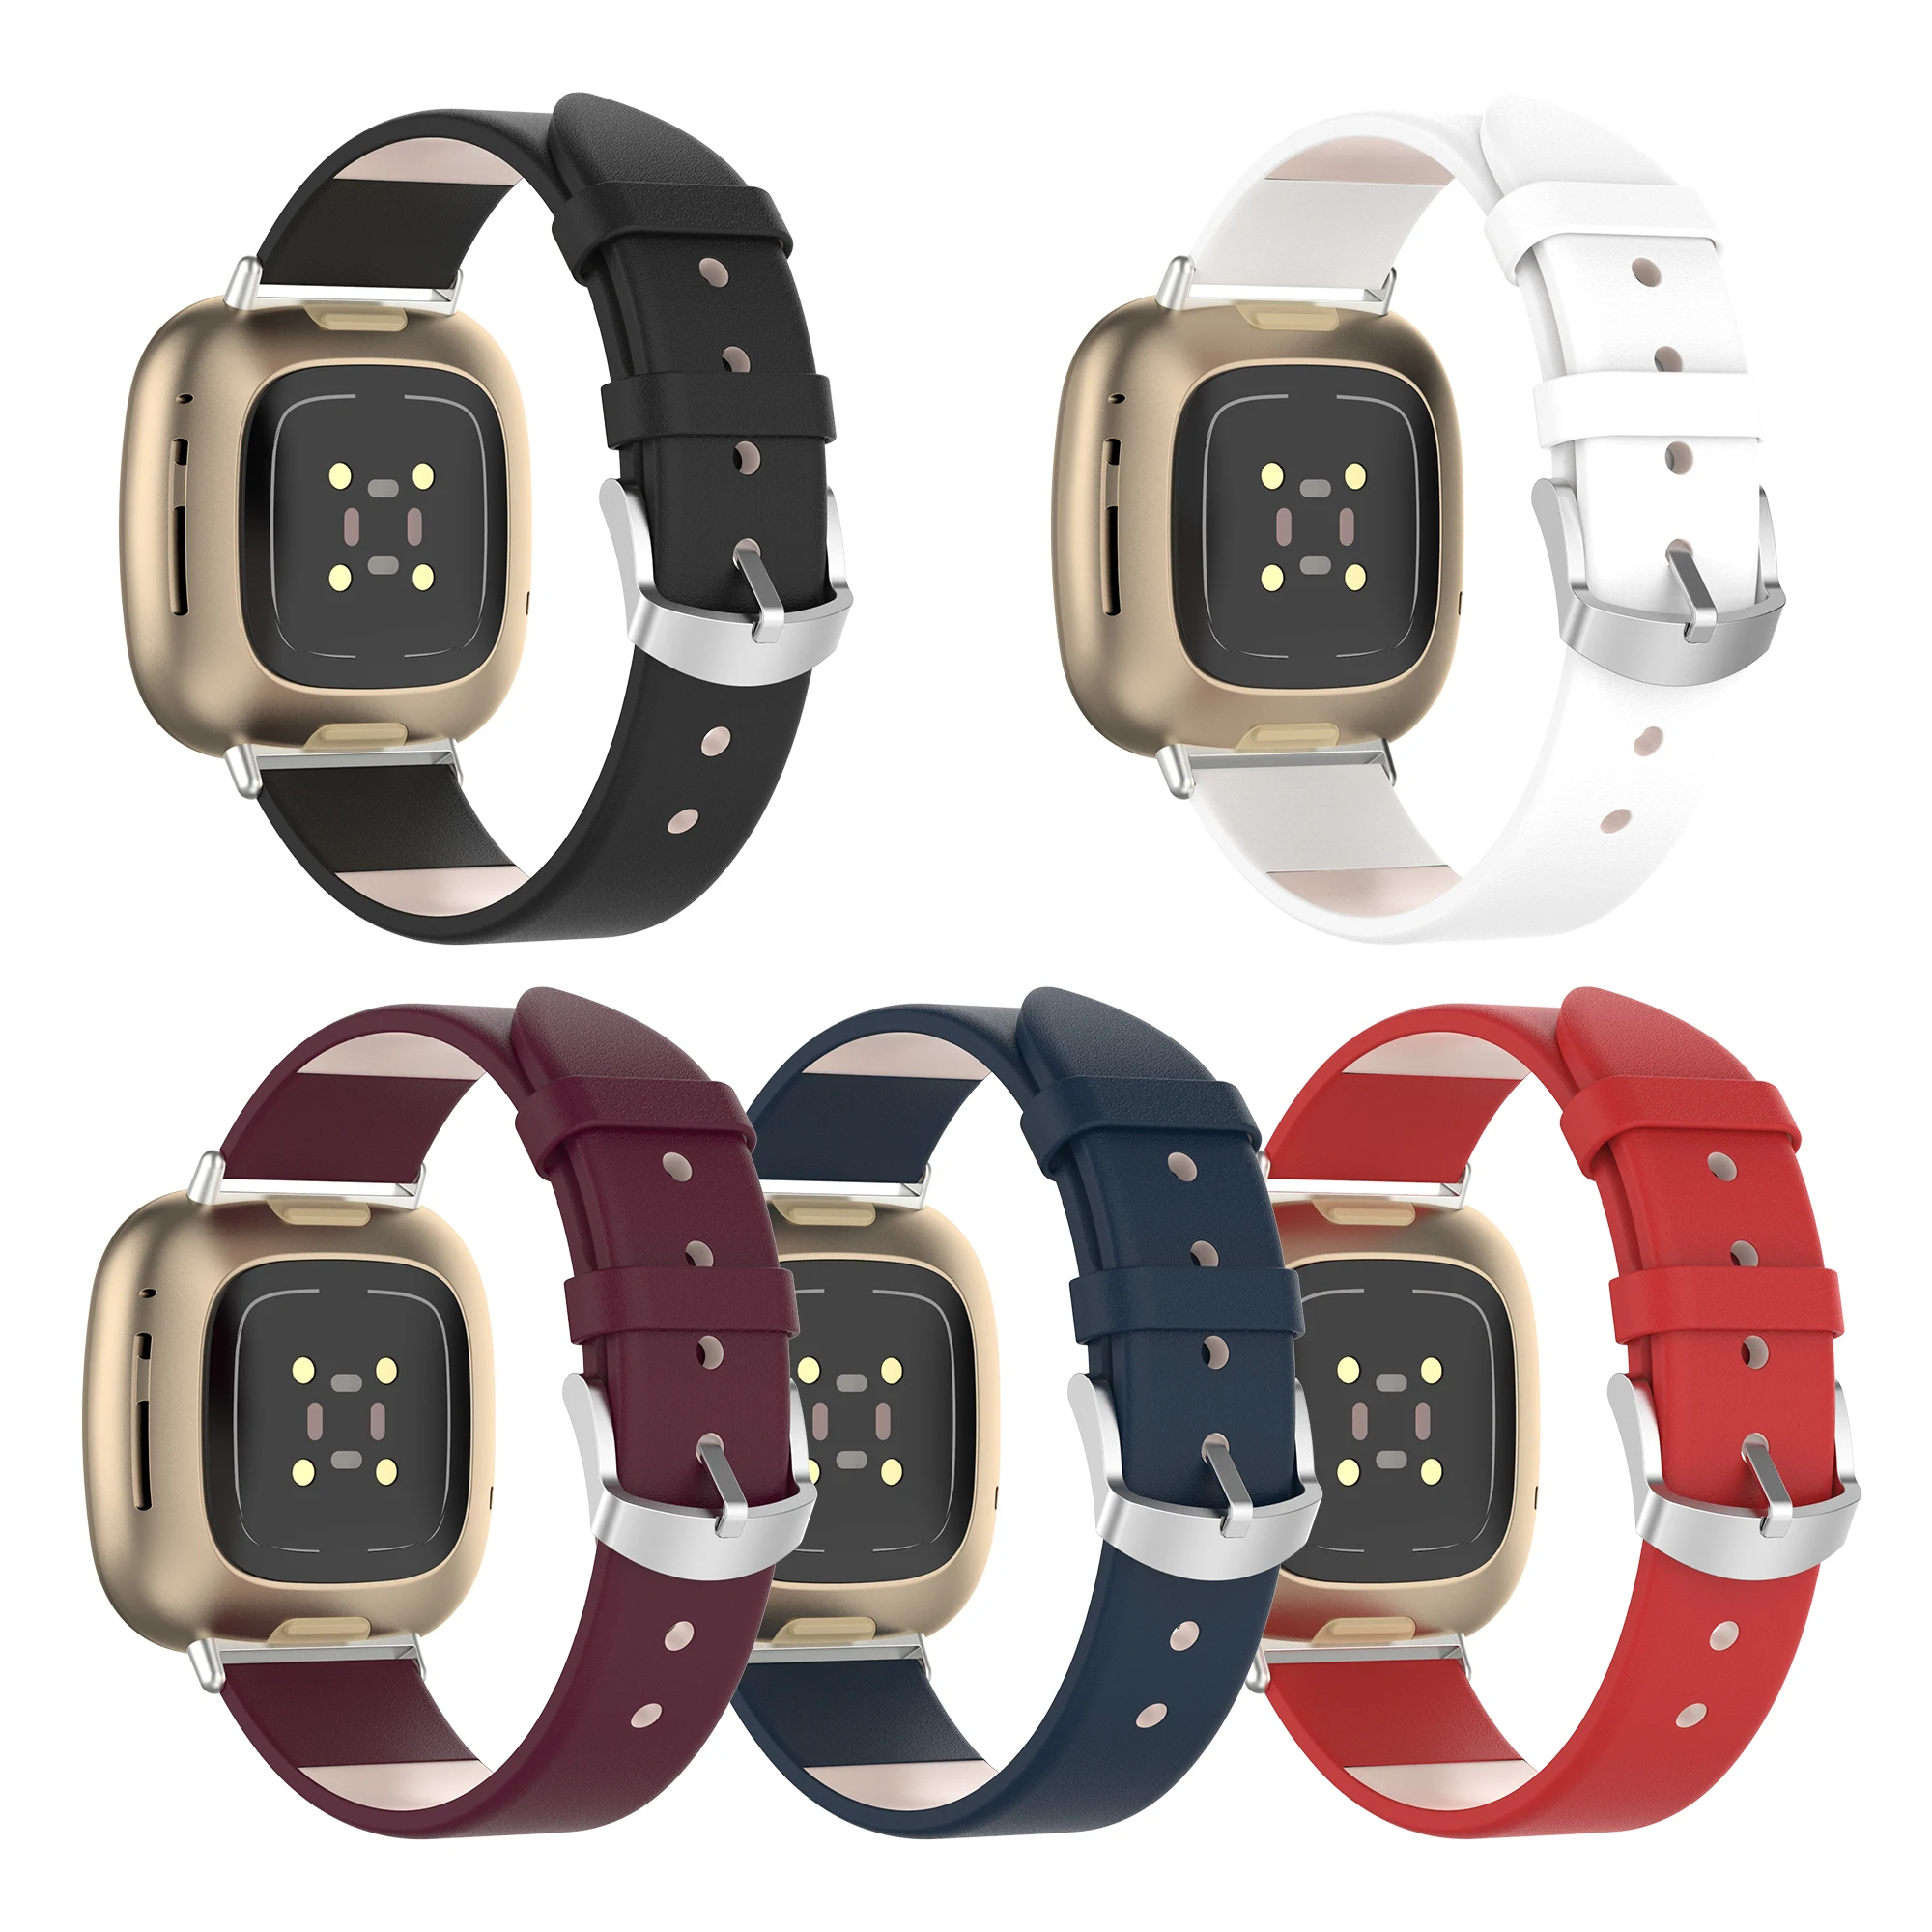 

Watch Accessories Band Strap For fitbit versa 3 watchband Genuine Leather Soft Bracelet for fitbit sense versa3 wristband Correa